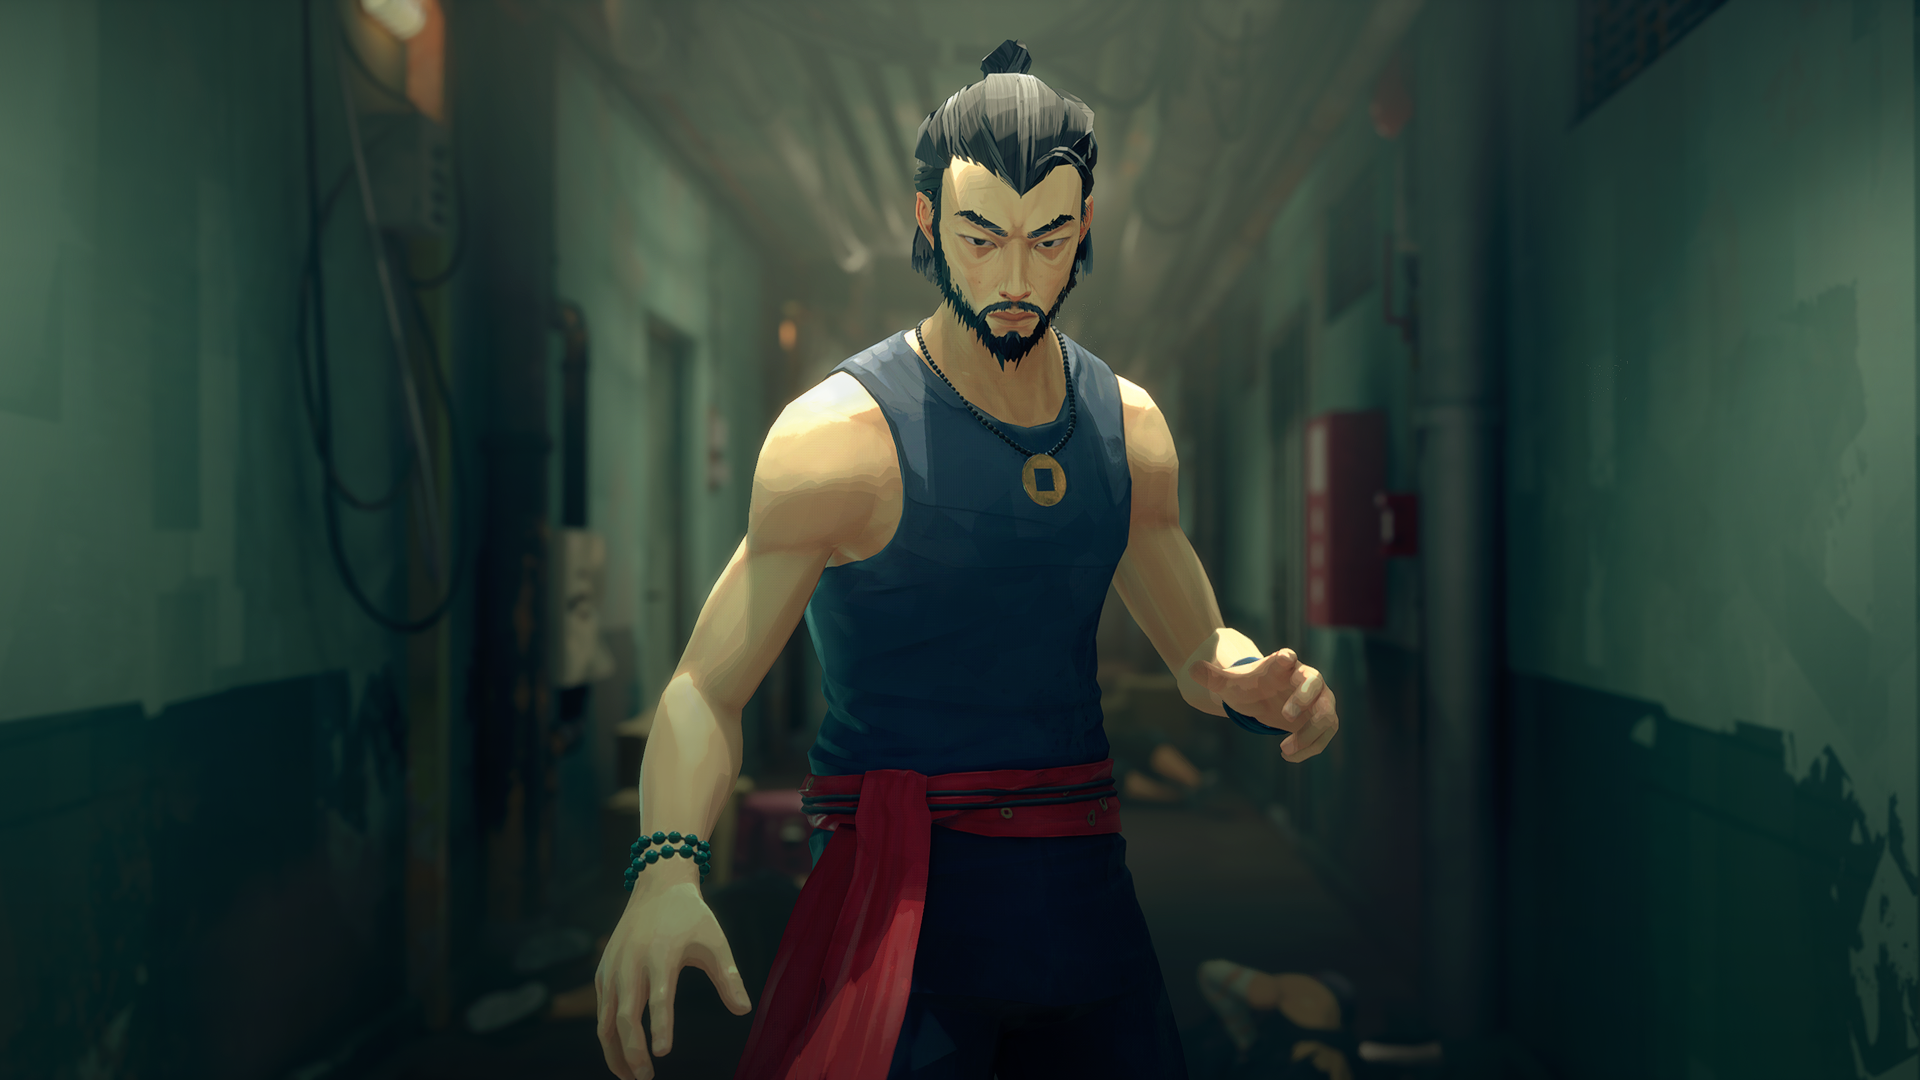 Sifu physical edition Game News Indie Game Fans News